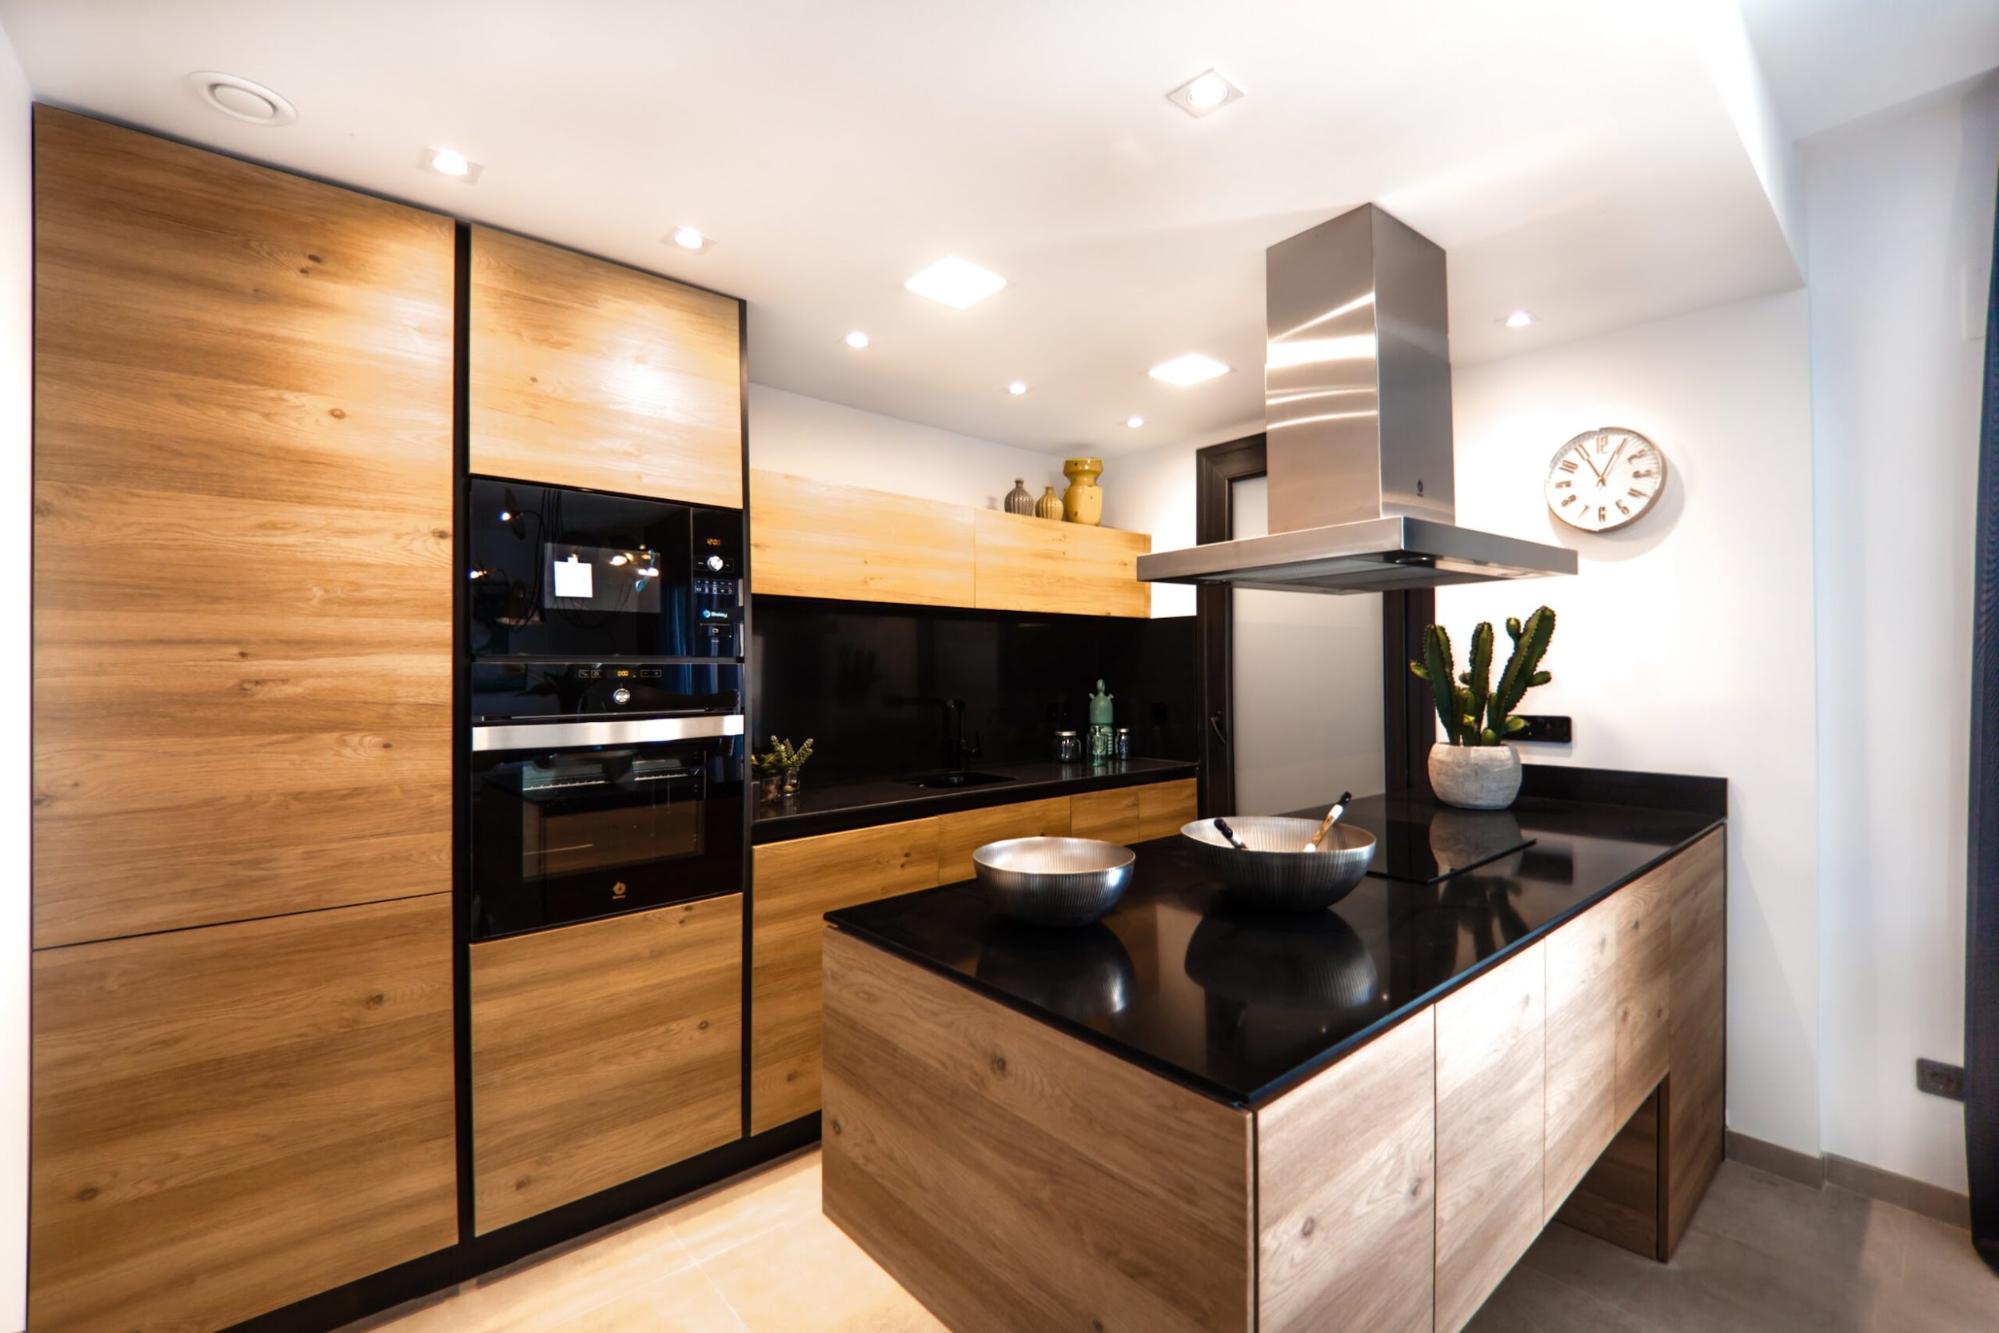 Laminate kitchen is a motivational kitchen for middle-class Homes.